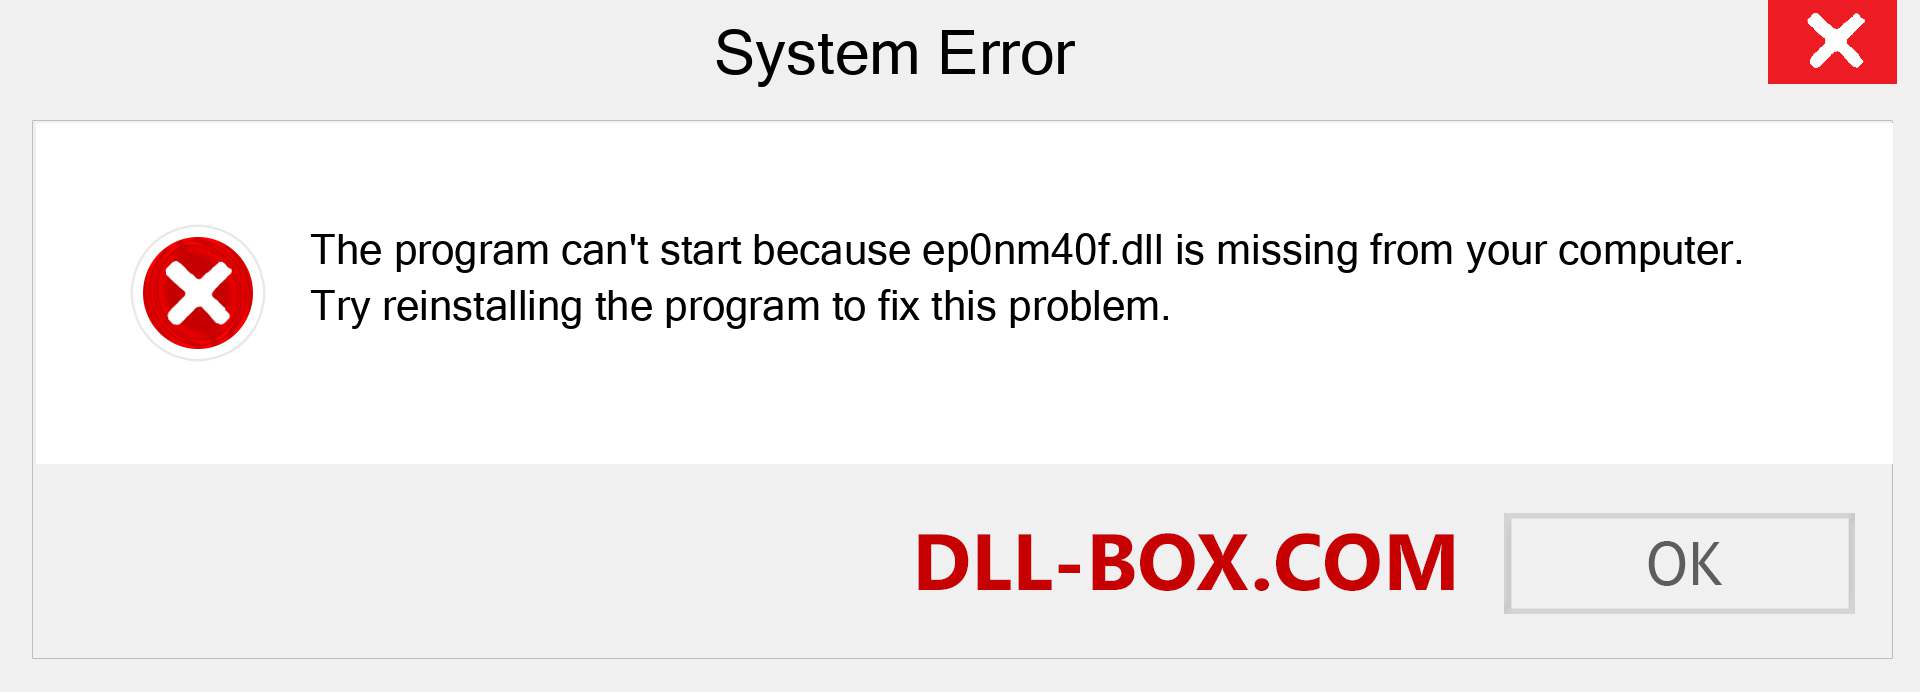  ep0nm40f.dll file is missing?. Download for Windows 7, 8, 10 - Fix  ep0nm40f dll Missing Error on Windows, photos, images